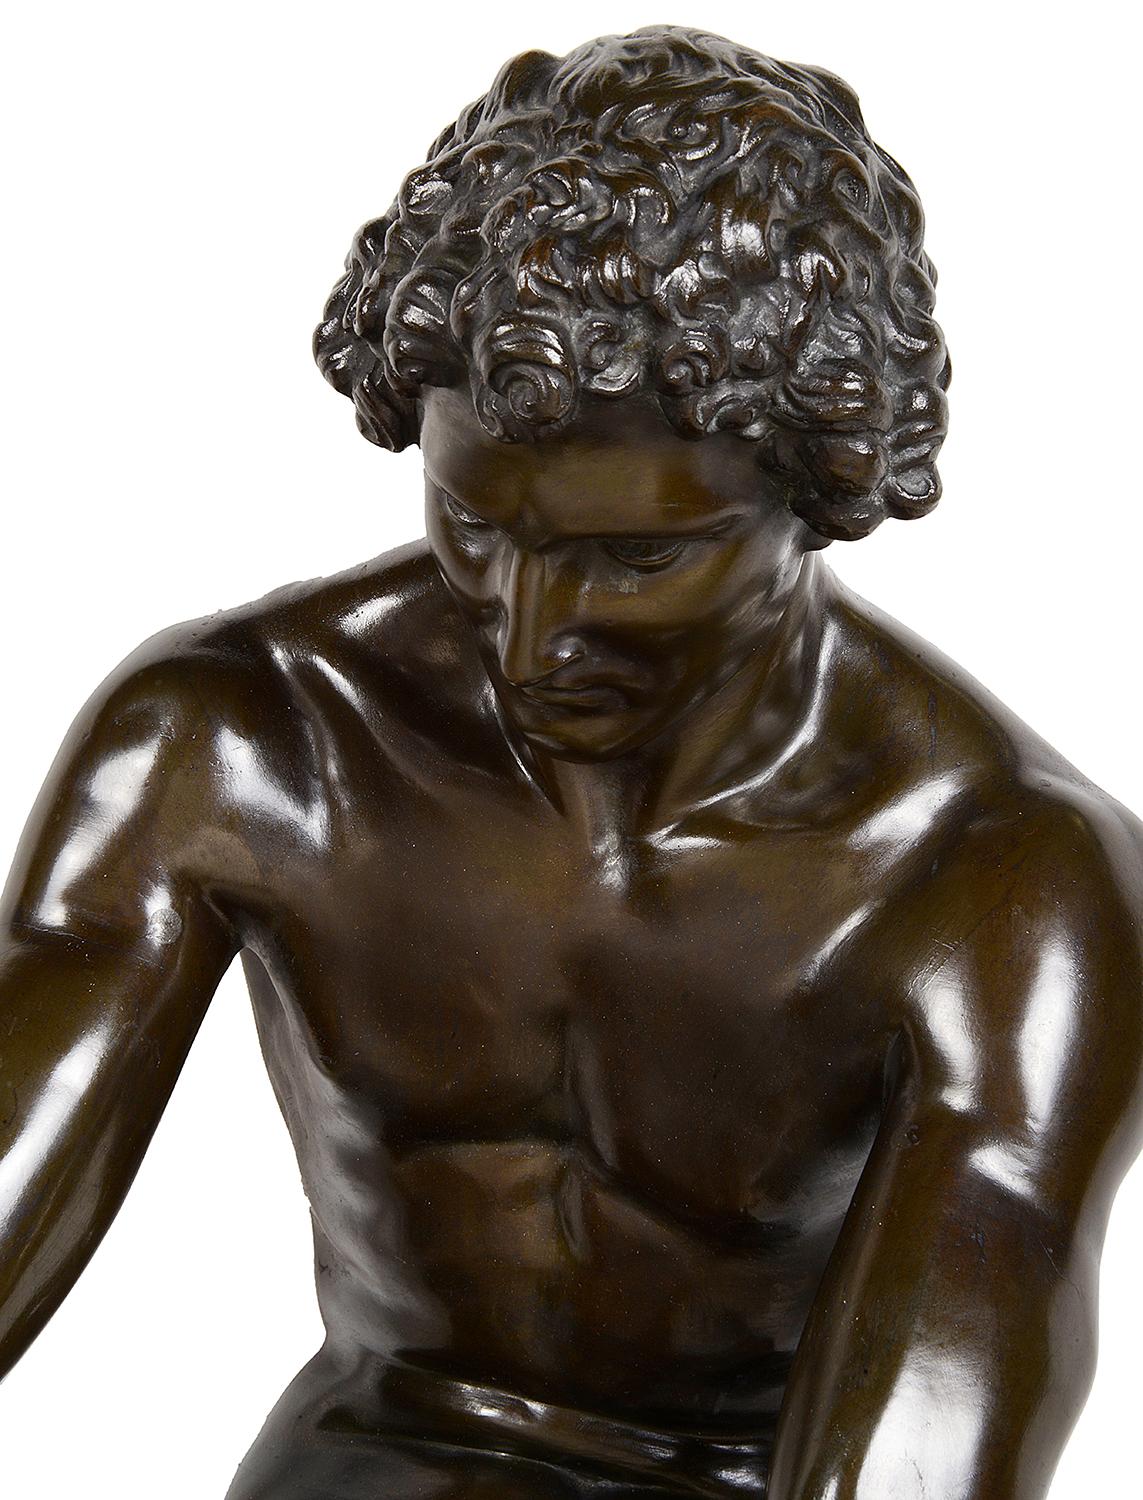 A very good quality 19th century bronze statue of a classical Greek figure breaking wood. Measures: 87cm(34